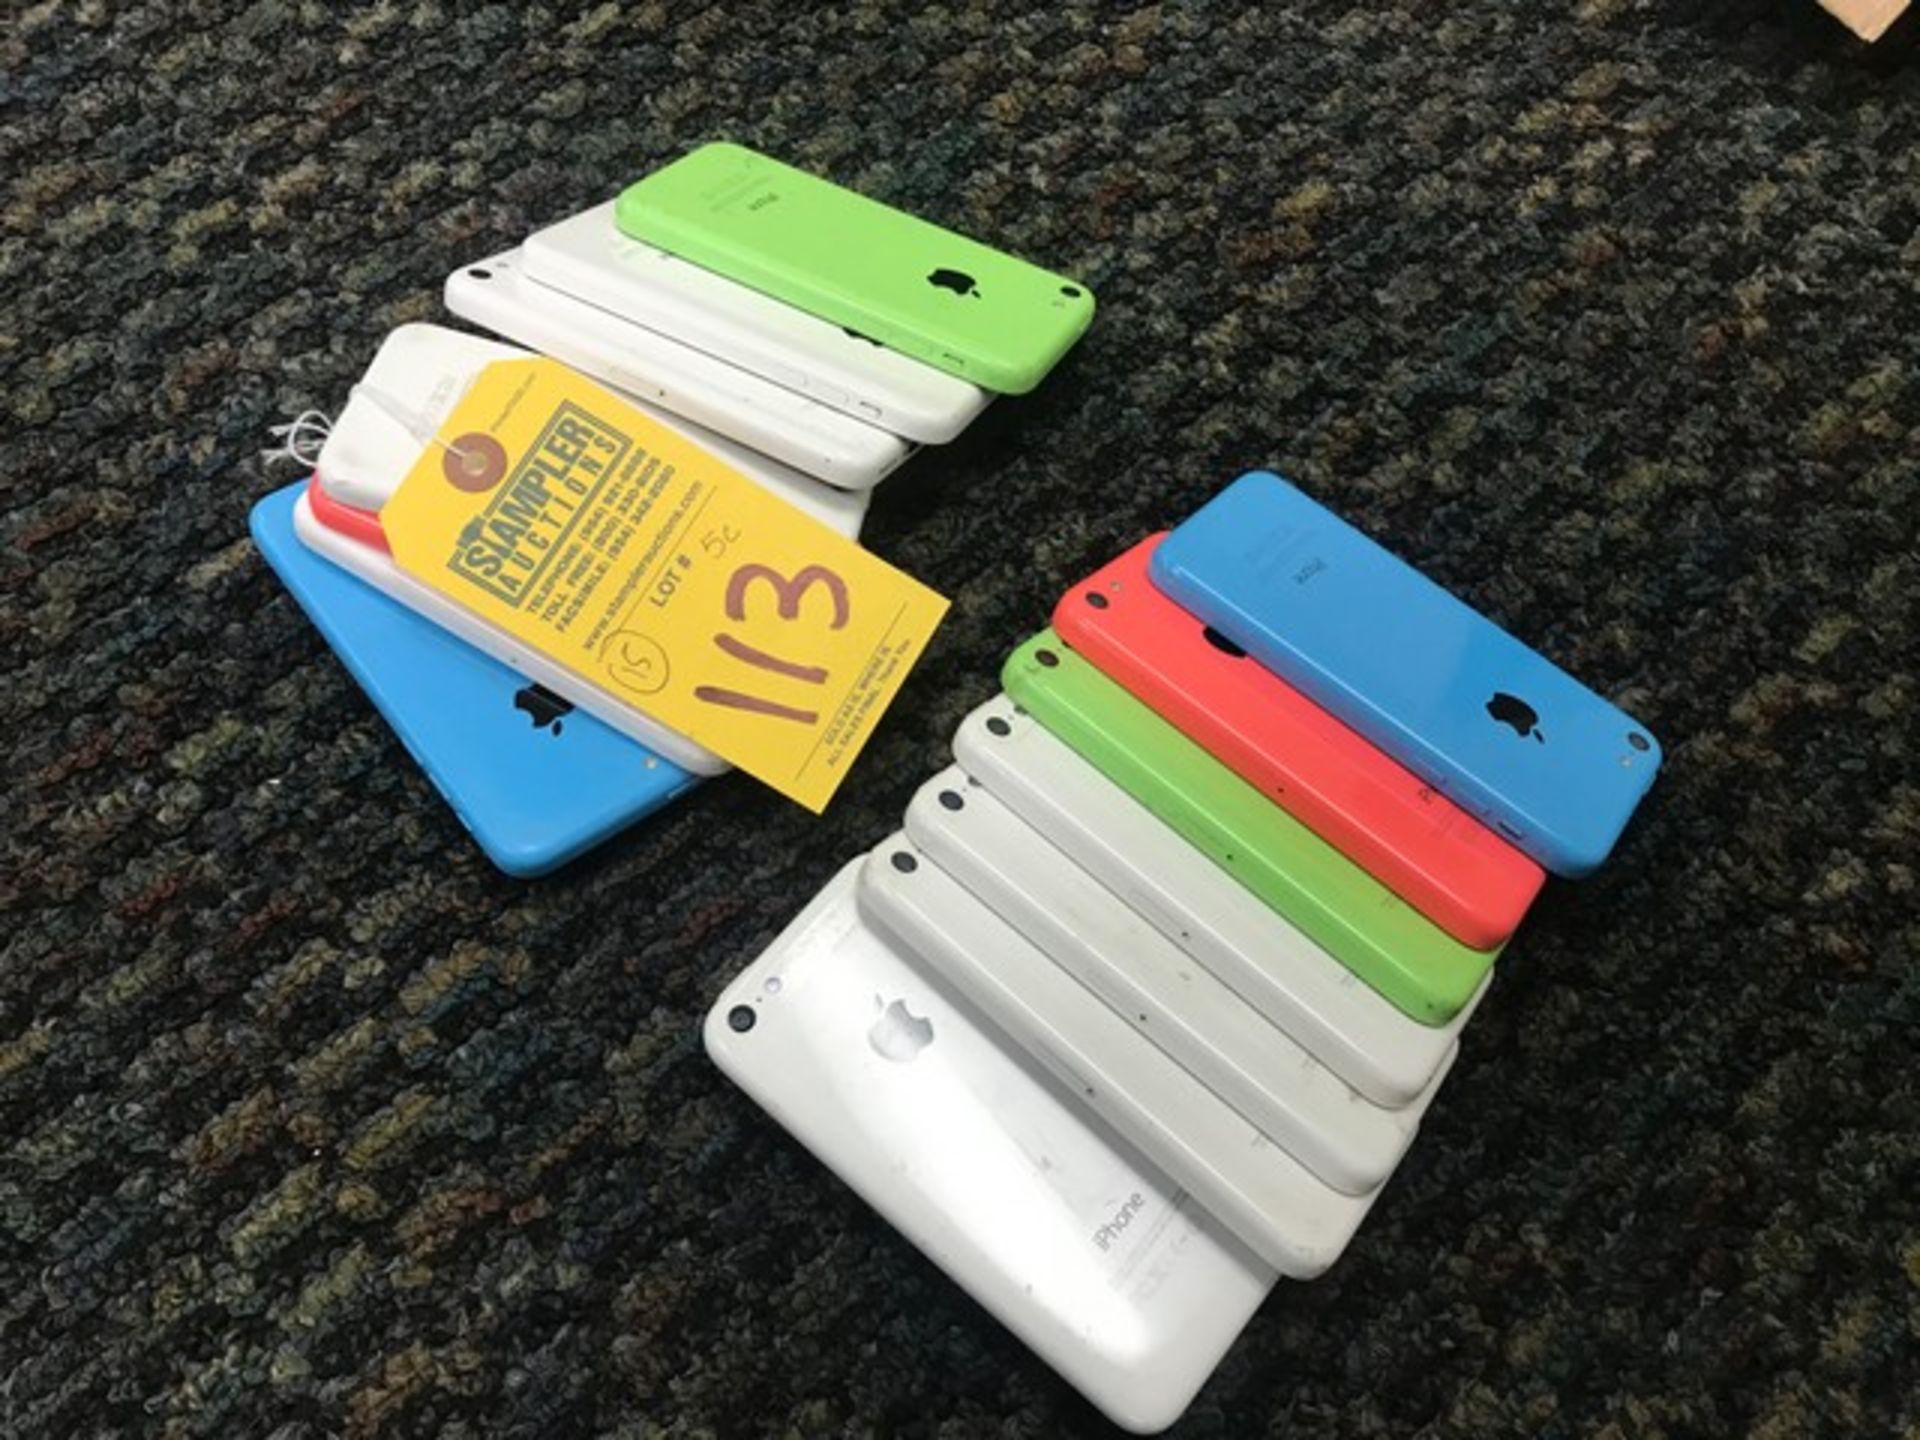 IPHONE 5C - ASSORTED COLORS